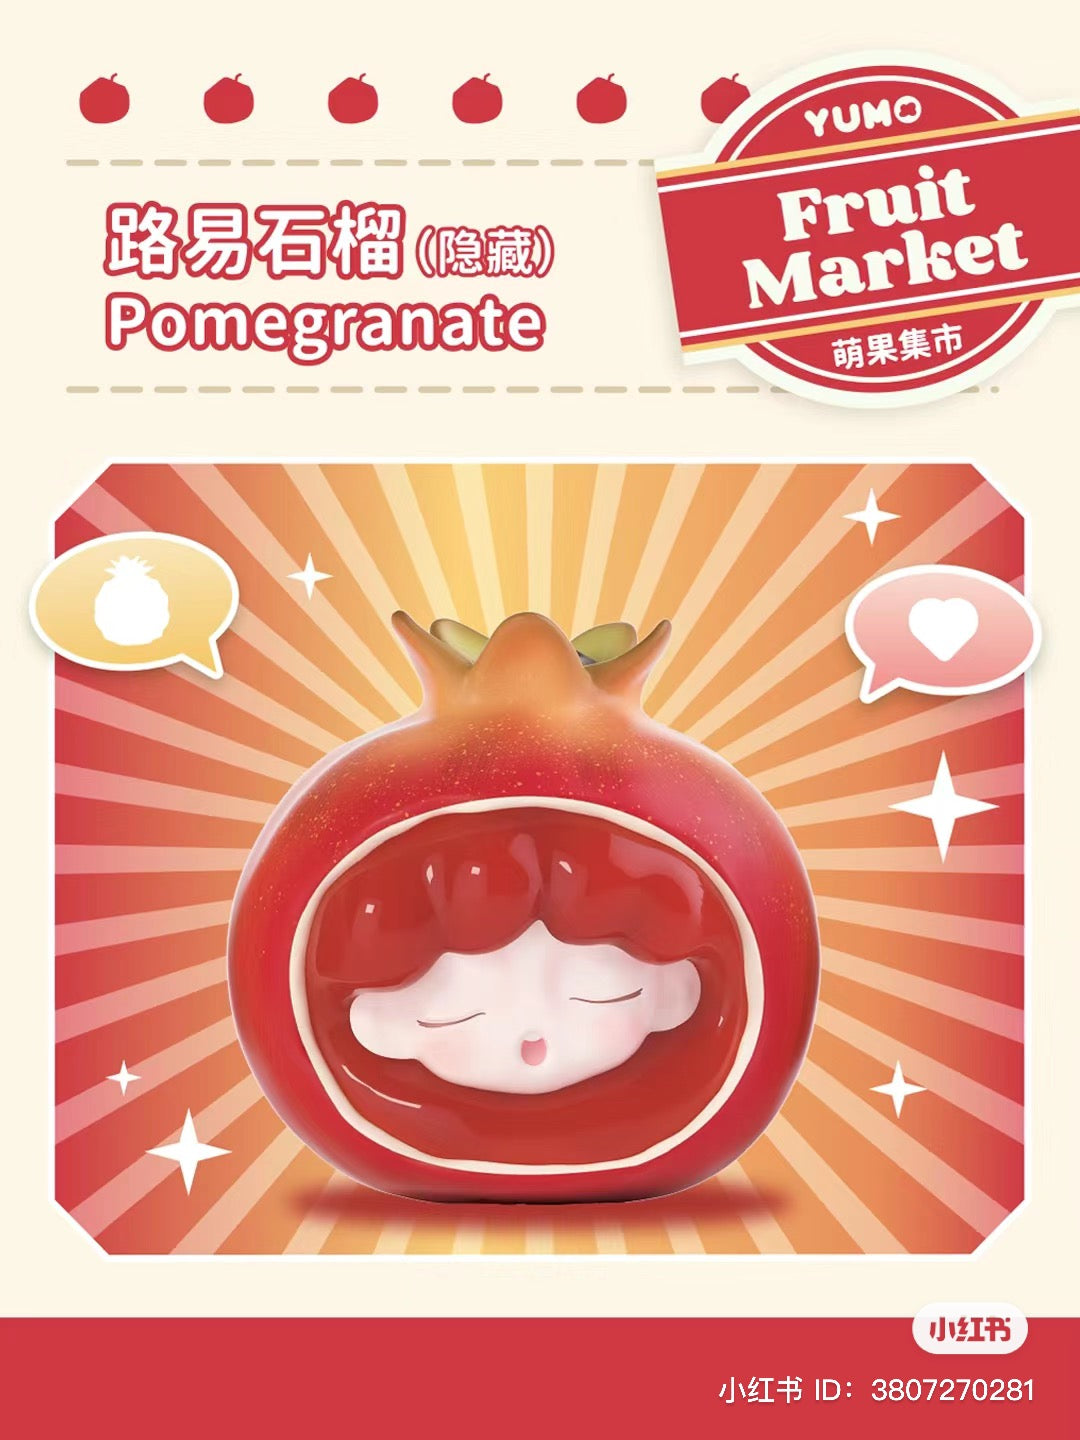 A blind box series by Yumo Fruit Market featuring 12 regular designs and 1 secret character inside a pomegranate. Each box contains 2 different toy designs. From Strangecat Toys.